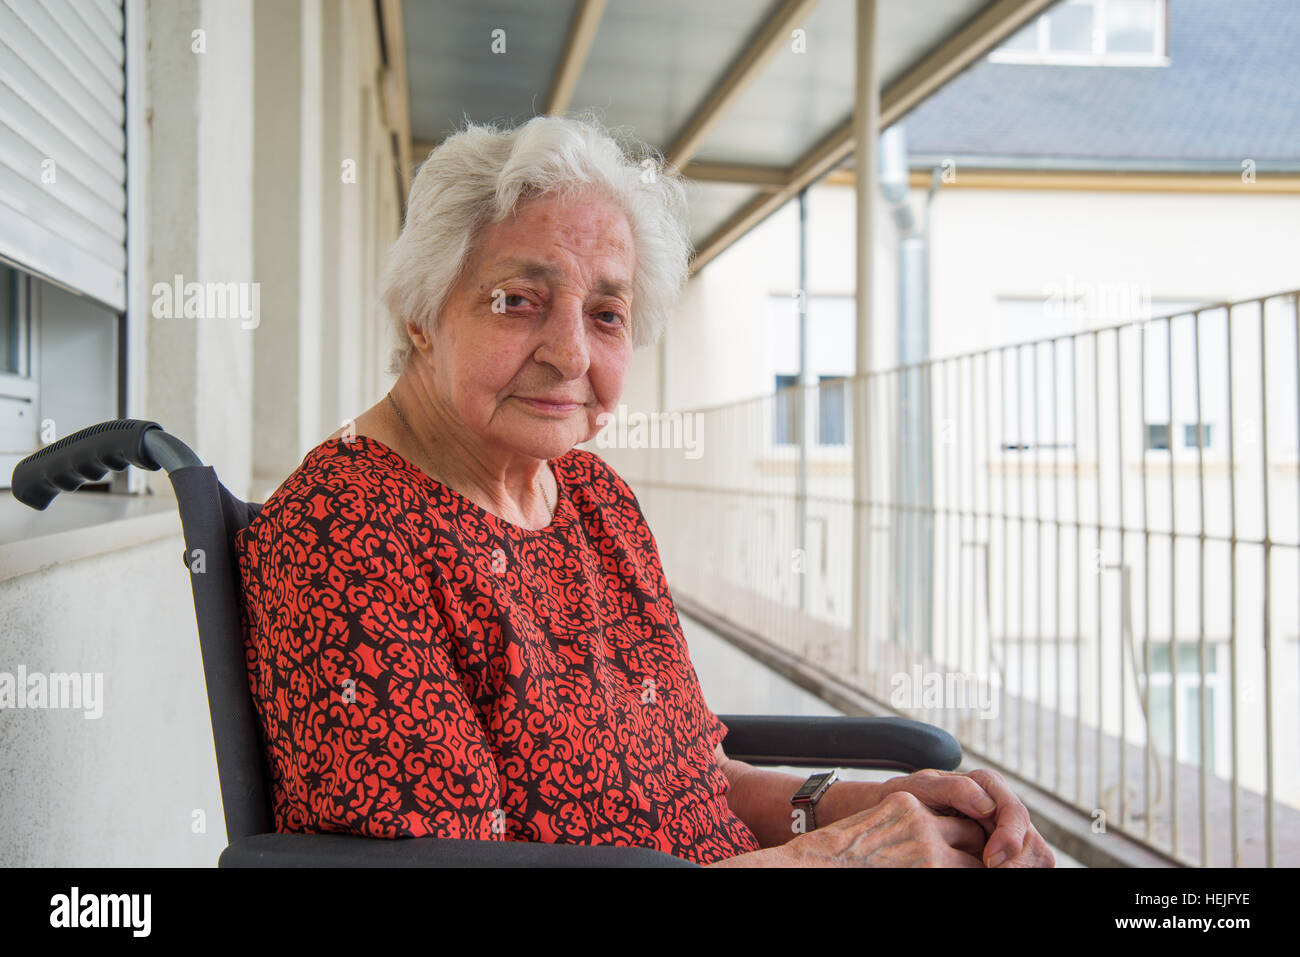 Portrait of elderly woman in a nursing home, smiling and looking at the camera. Stock Photo